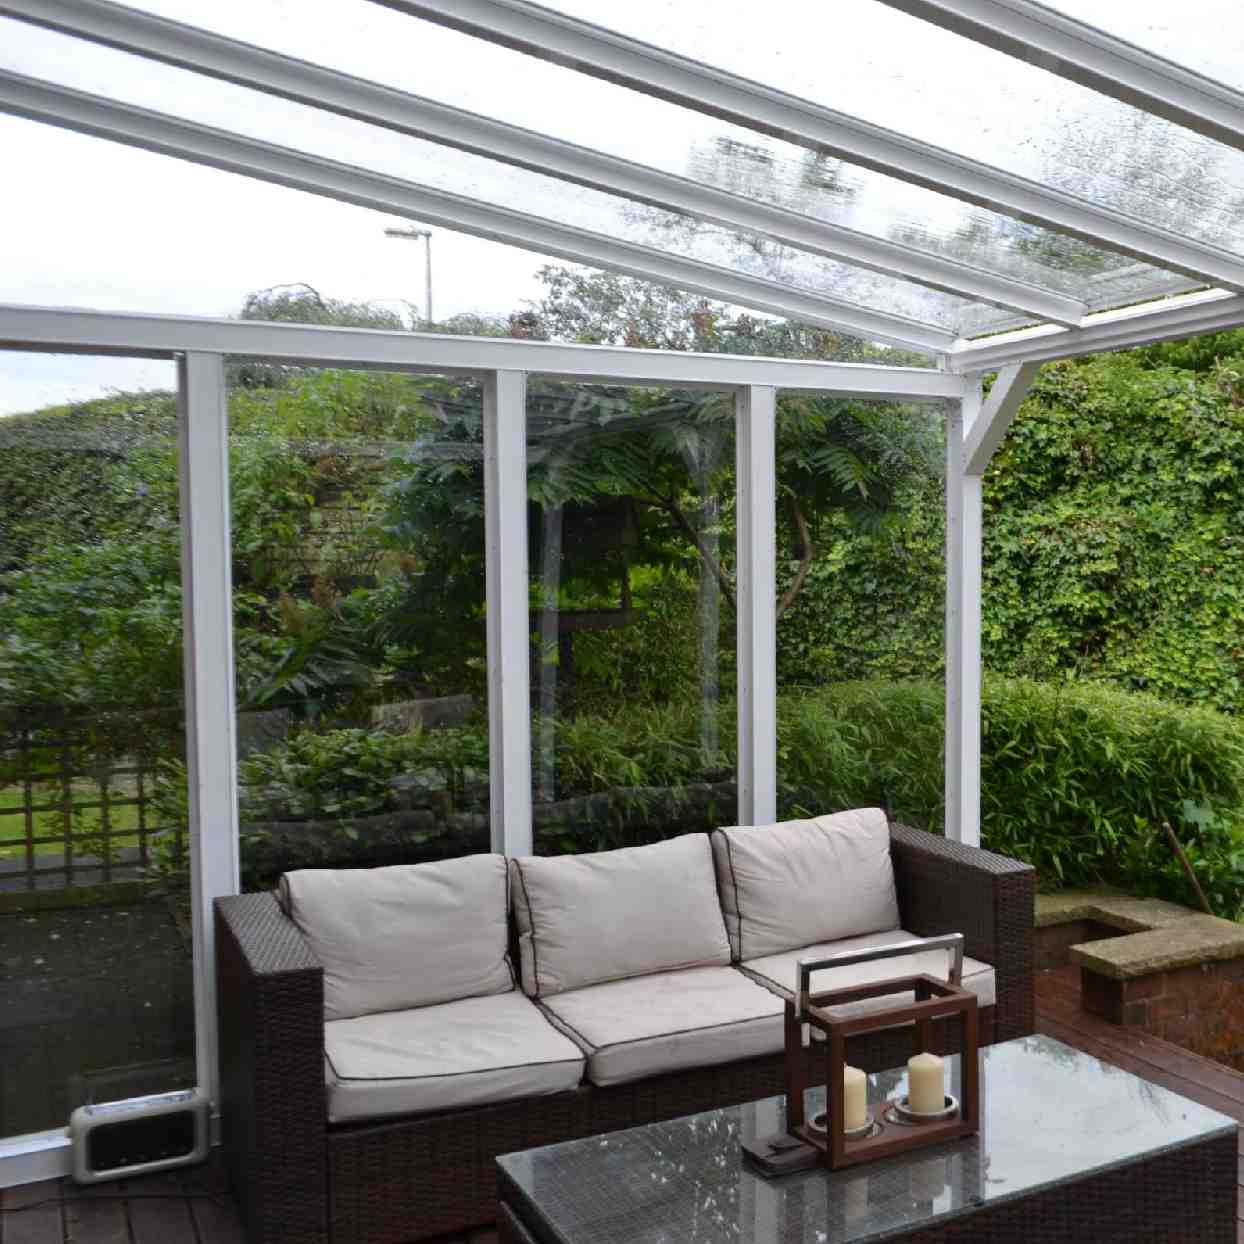 Buy Omega Verandah White with 6mm Glass Clear Plate Polycarbonate Glazing - 9.1m (W) x 2.0m (P), (5) Supporting Posts online today